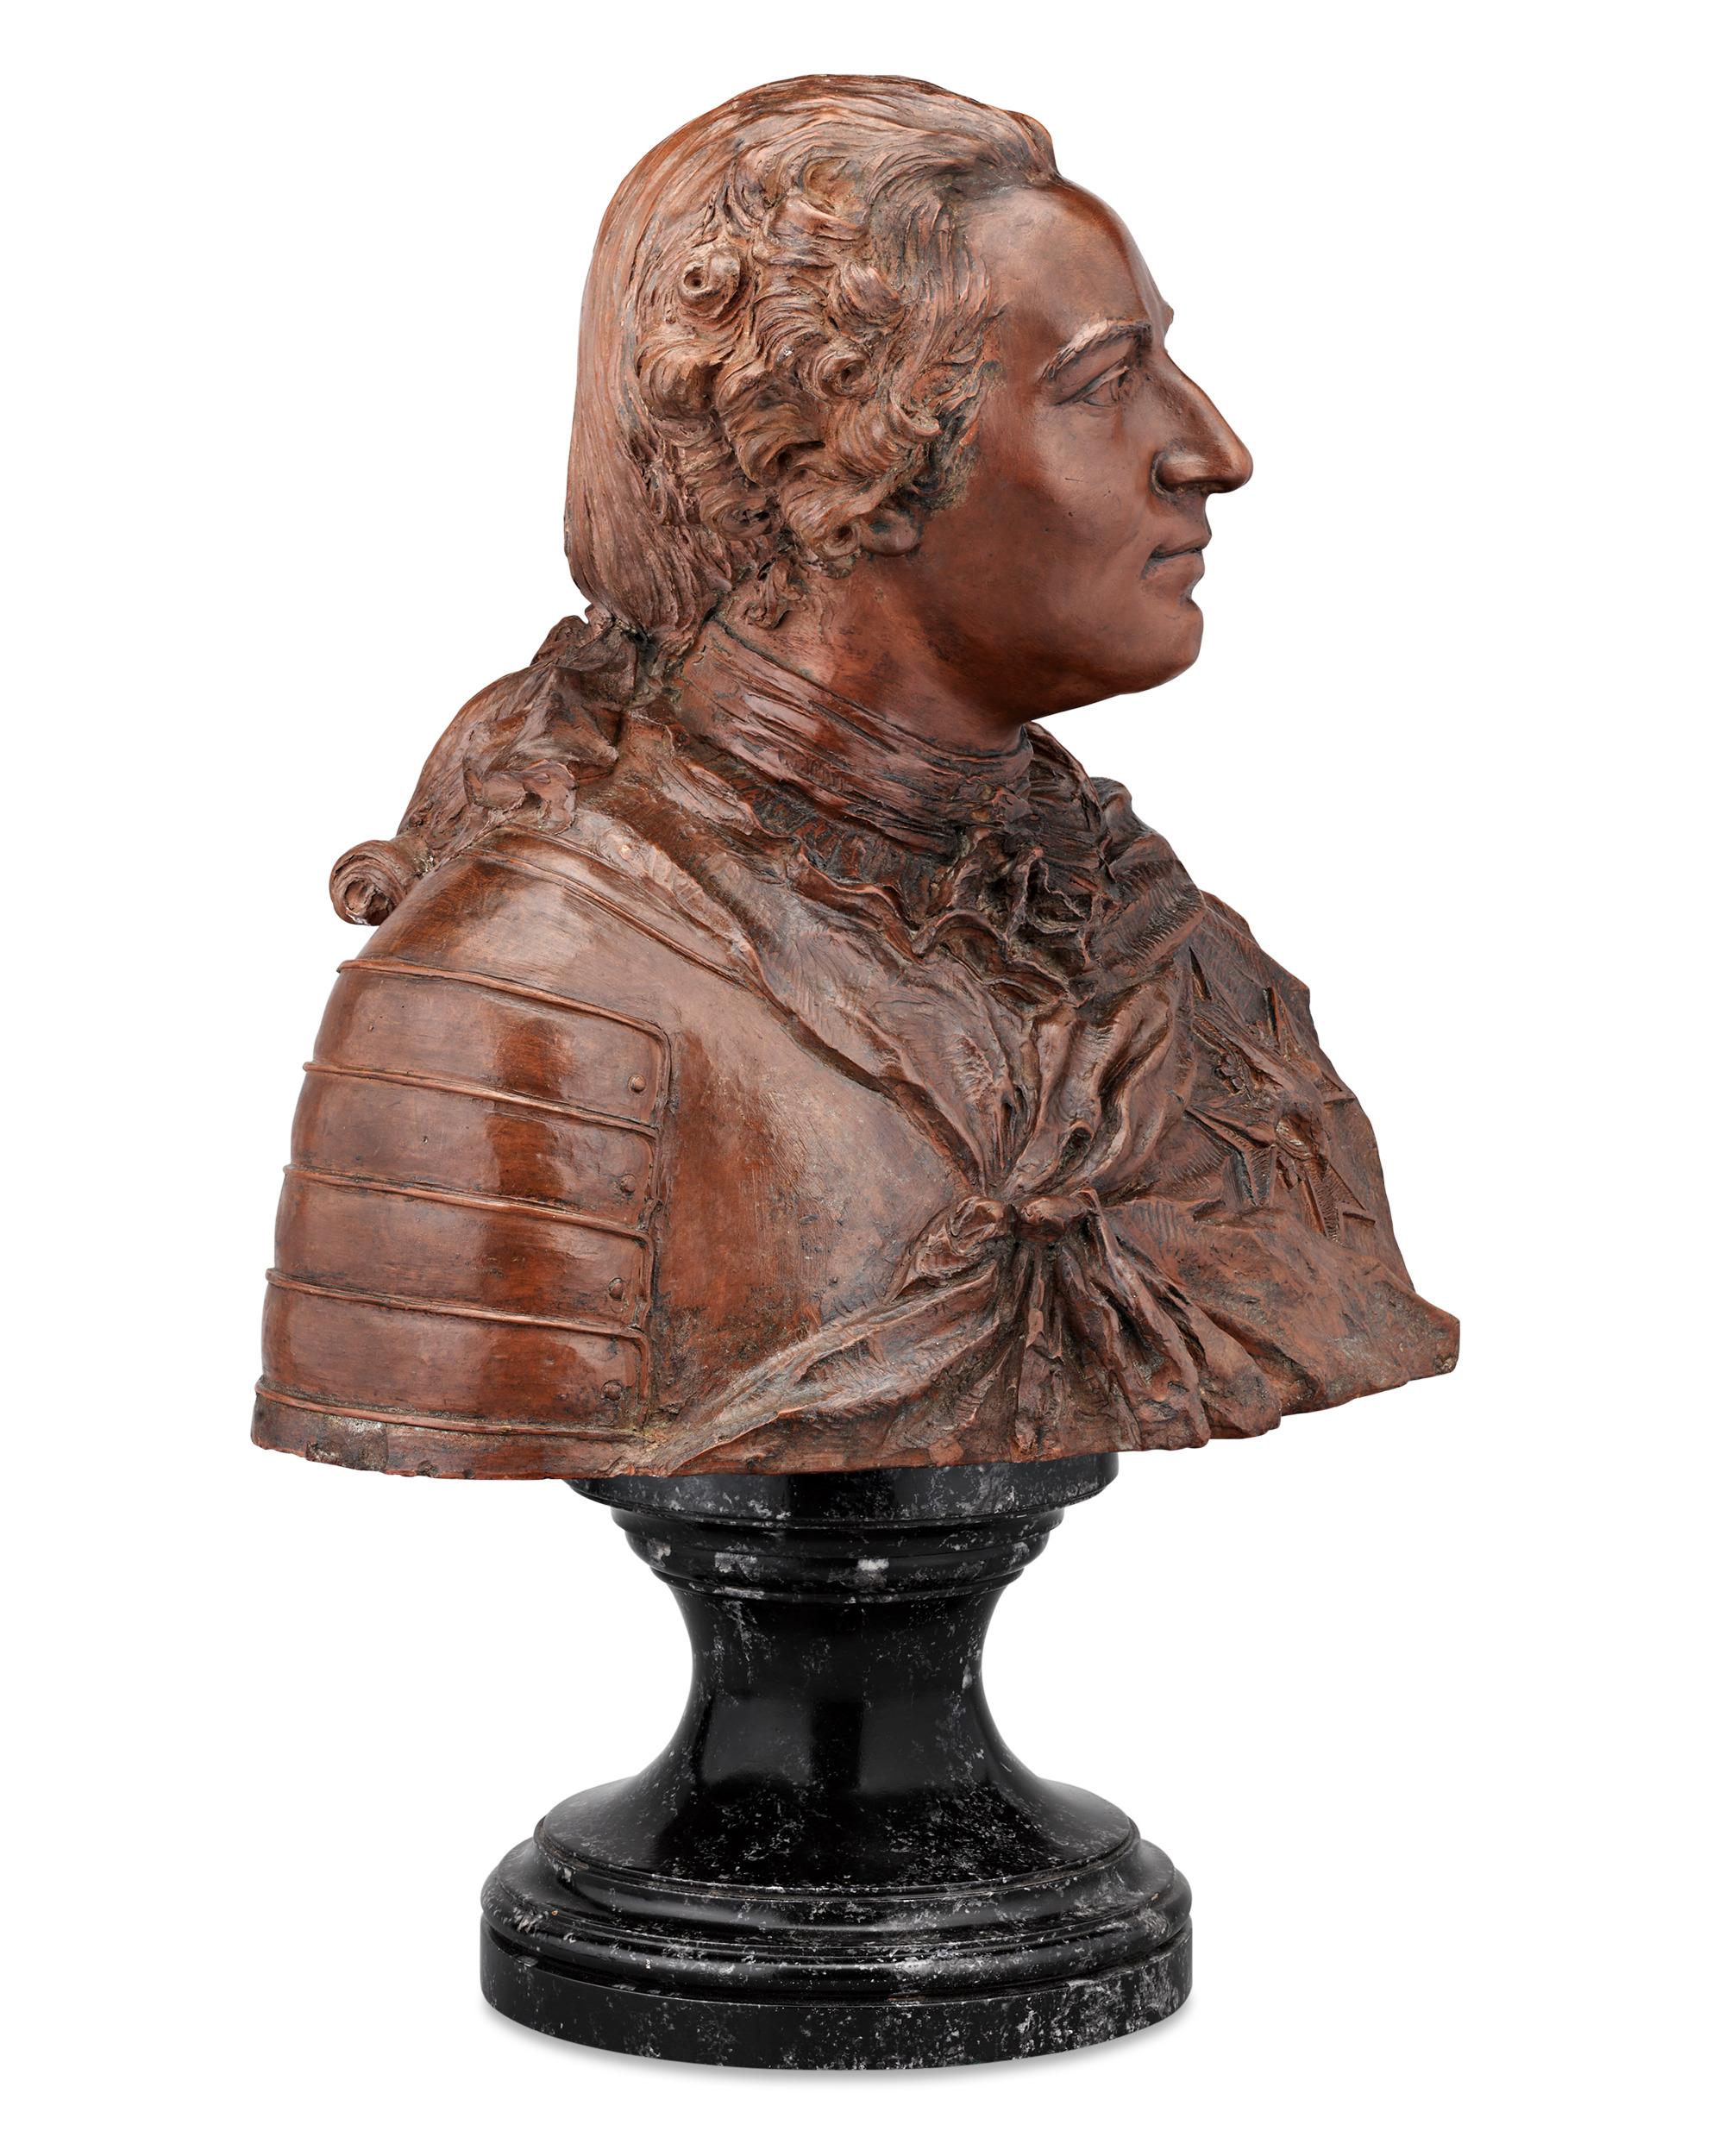 Presenting a regal yet approachable portrait of France’s Louis XV, this terracotta bust is modeled after Jean-Baptiste Lemoyne’s sculpture of the king executed in 1757, which now resides in the Metropolitan Museum of Art in New York. This version is